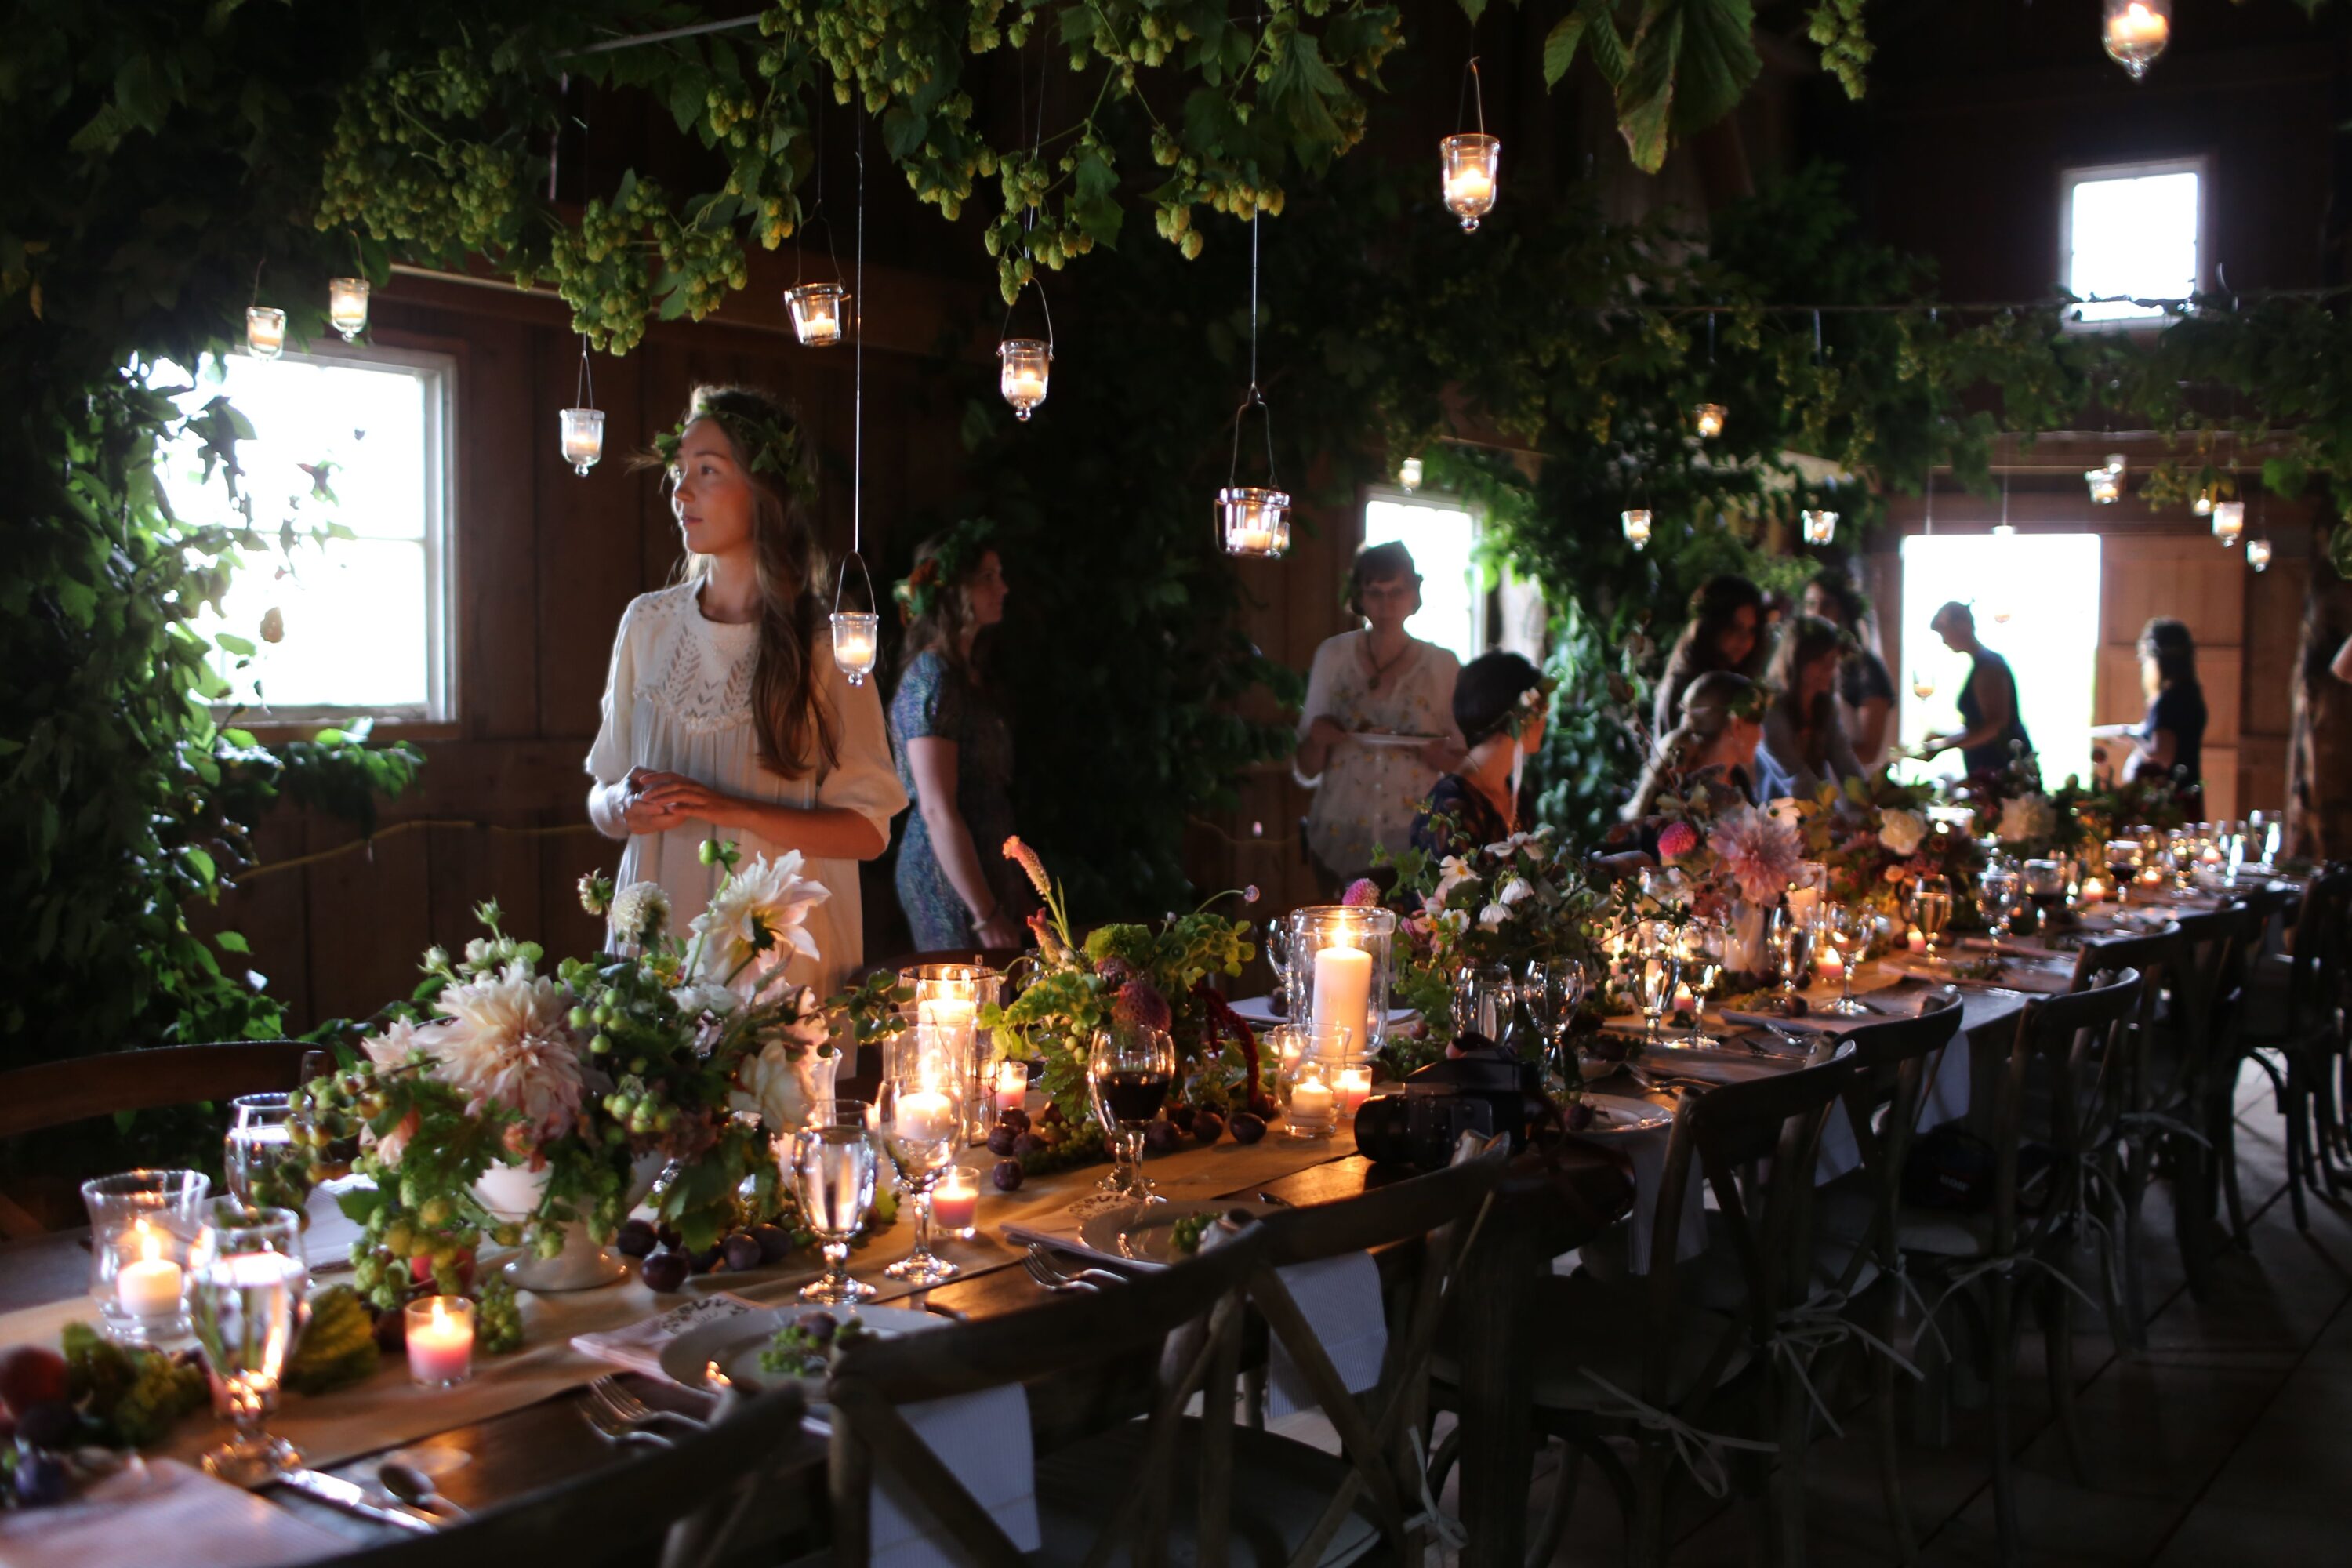 Floret workshop students at a dinner table decorated with flowers and foliage